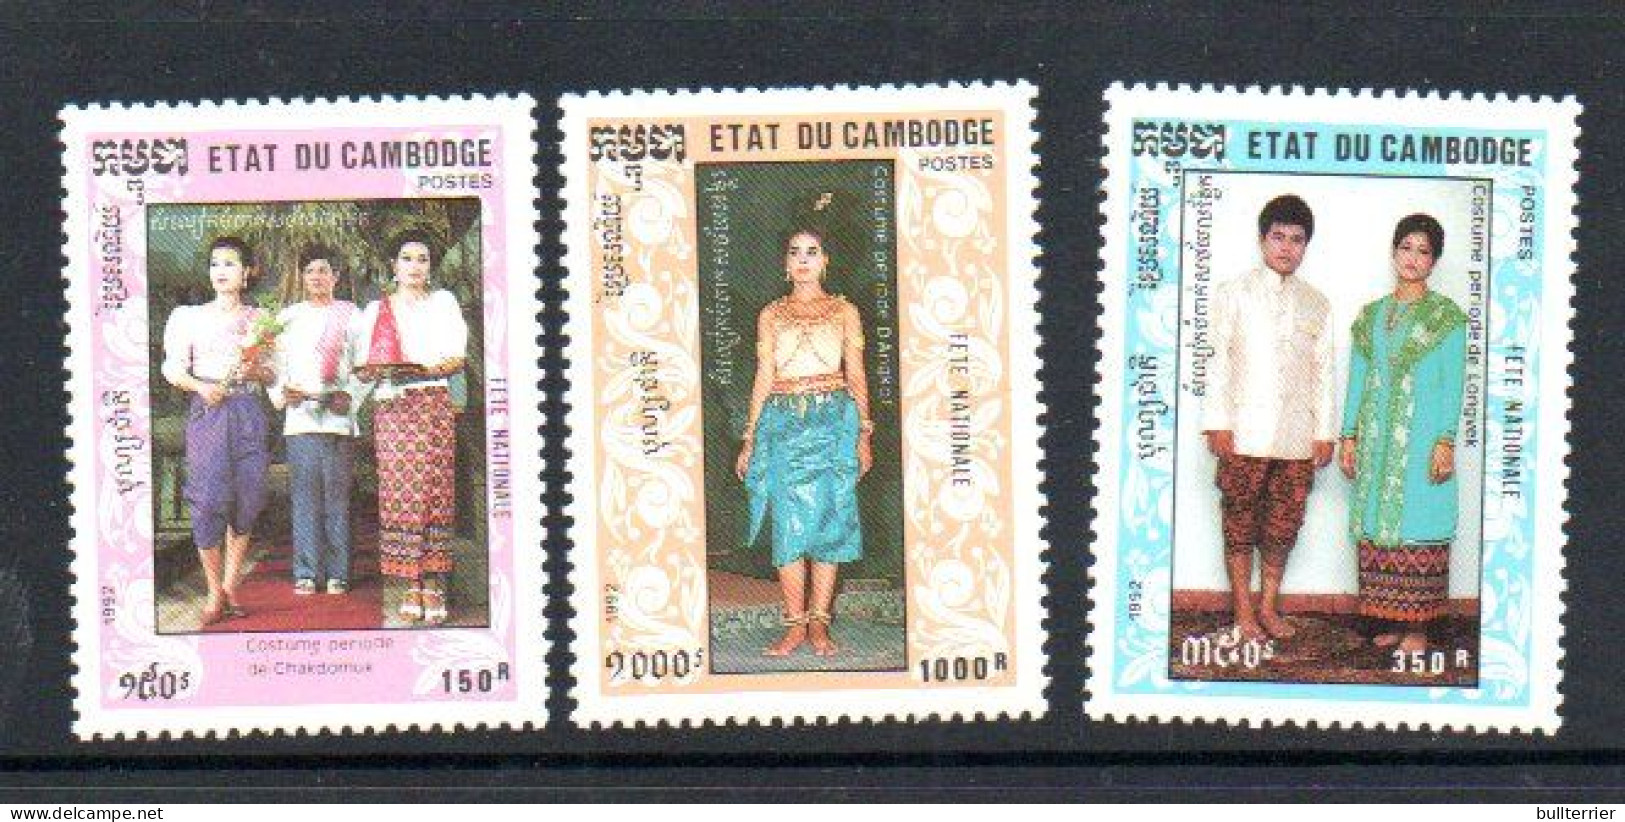 CAMBODIA - 1992- TRADITIONAL COSTUMES SET OF 3  MINT NEVER HINGED - Cambogia